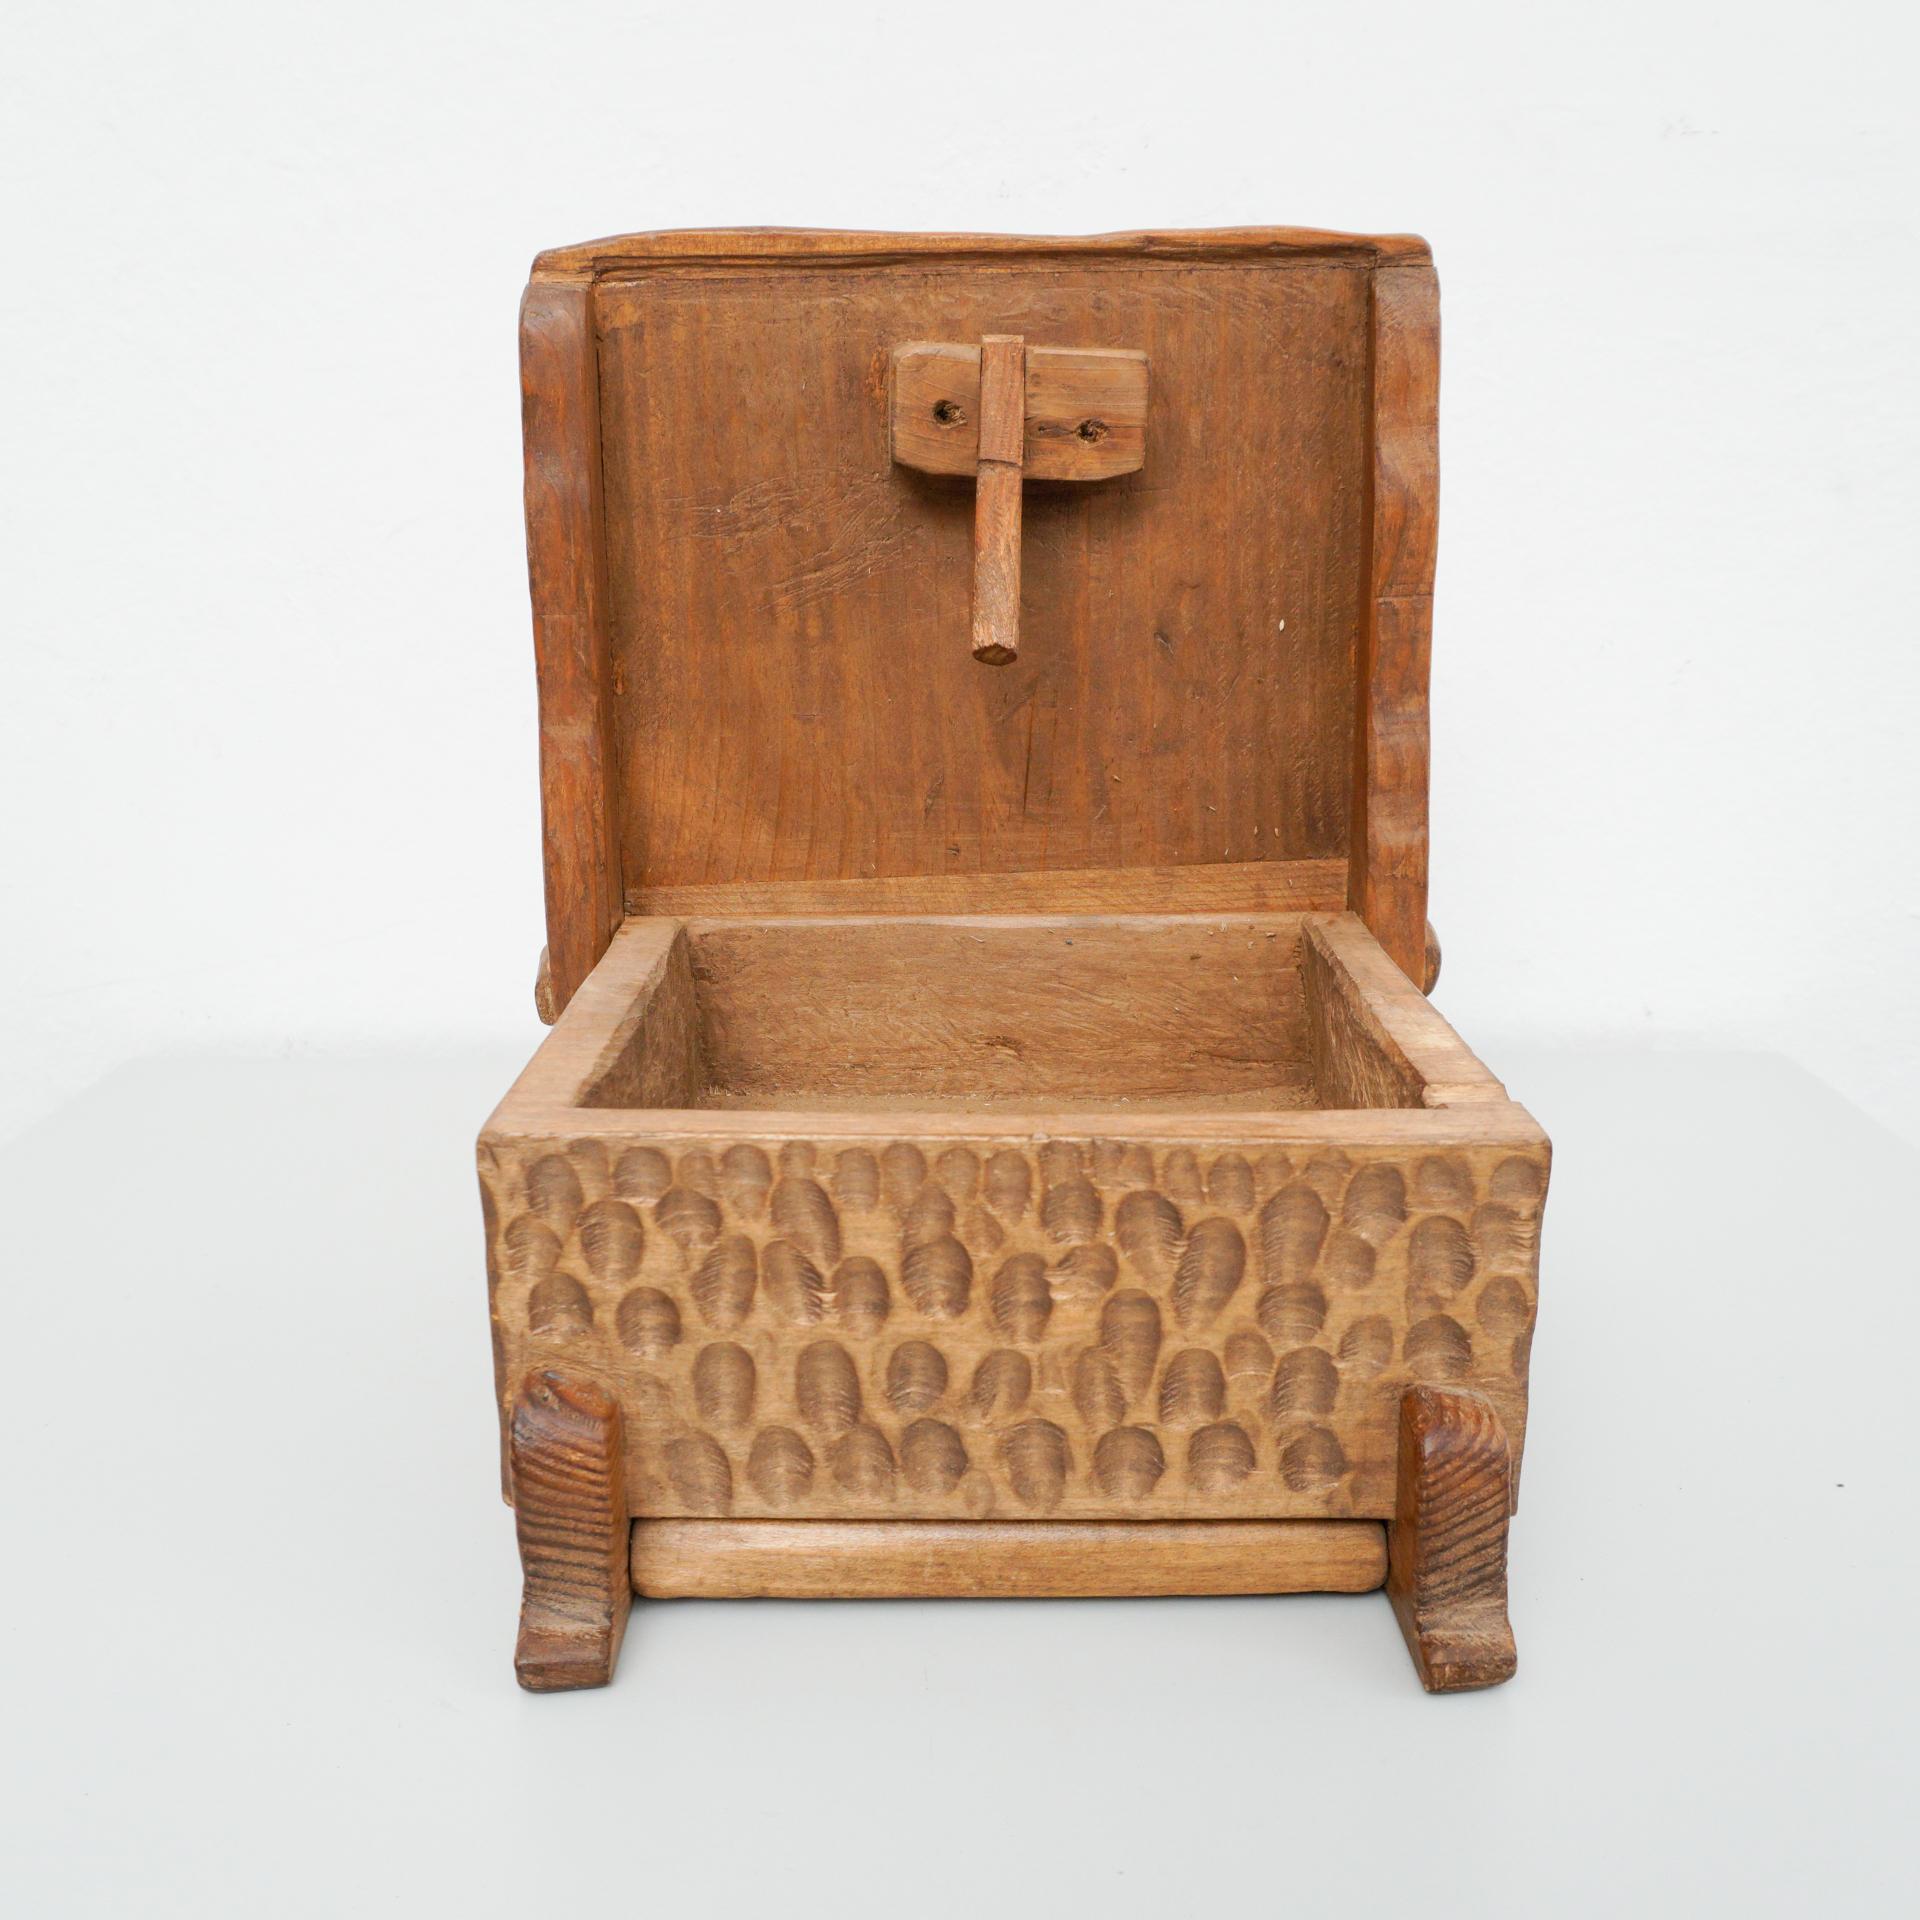 20th Century Wood Handcarved Box After Alexandre Noll For Sale